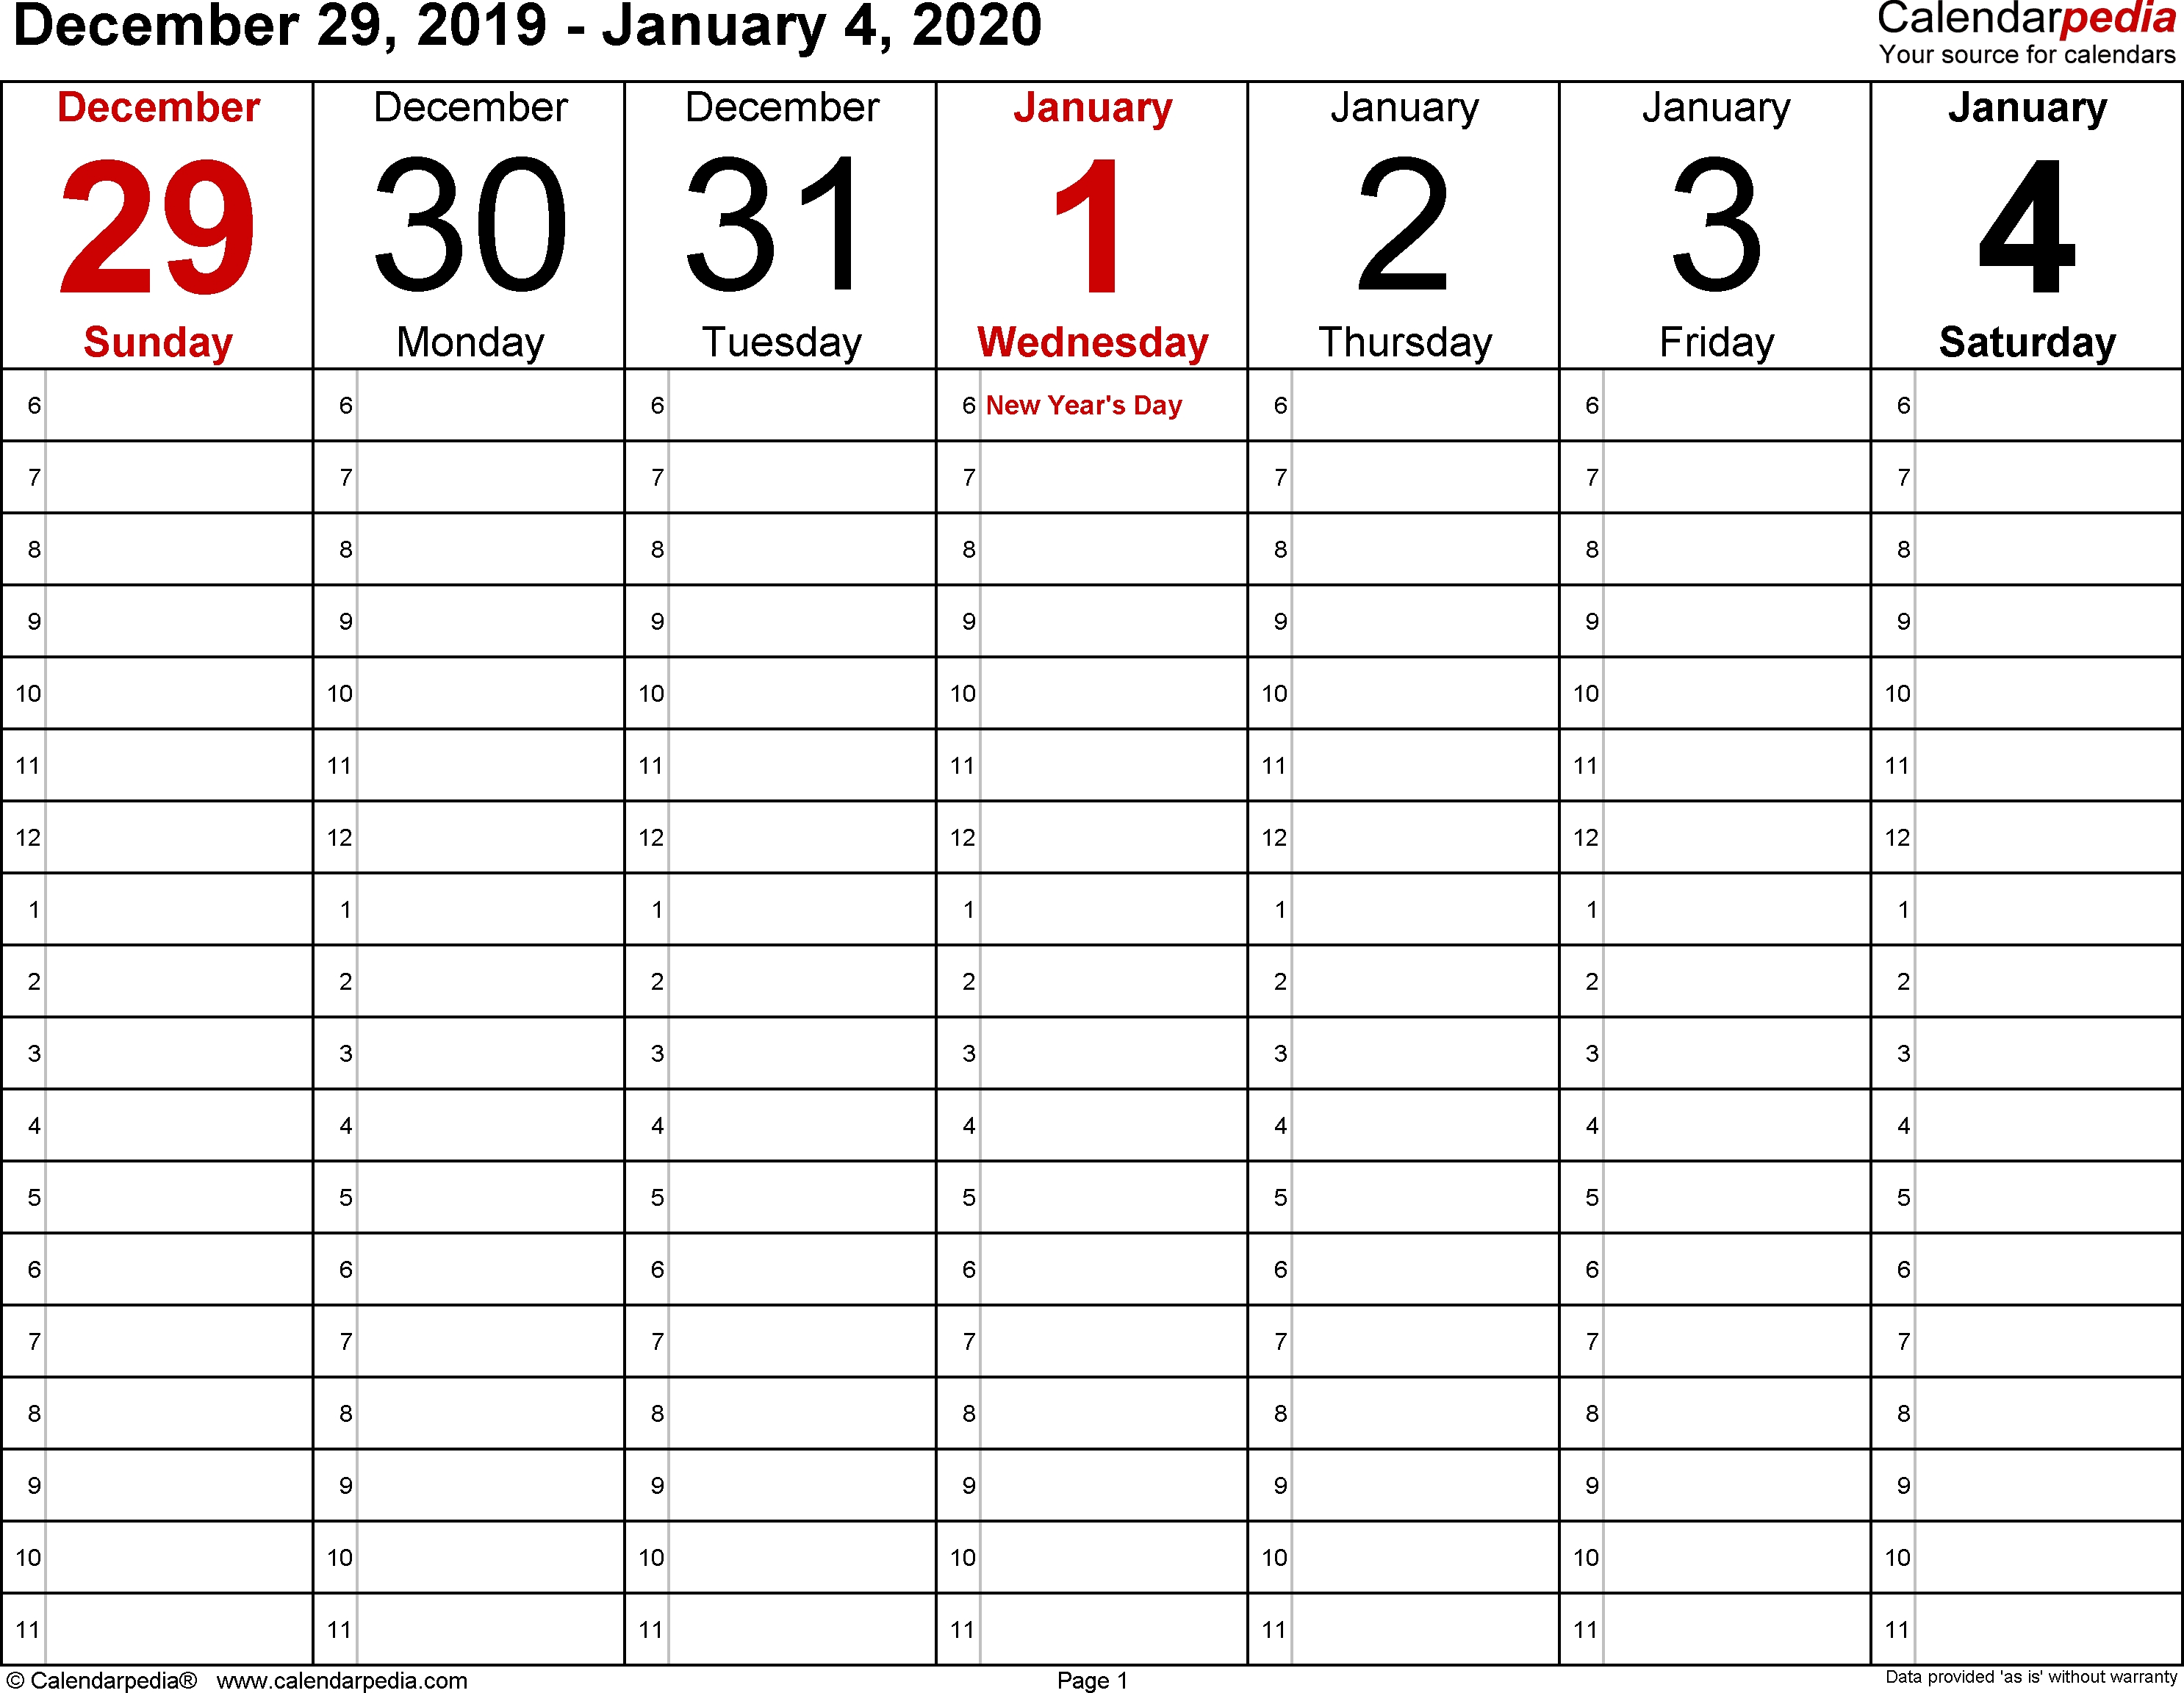 Weekly Calendar 2020 For Word - 12 Free Printable Templates intended for Writing Calendar For 2020